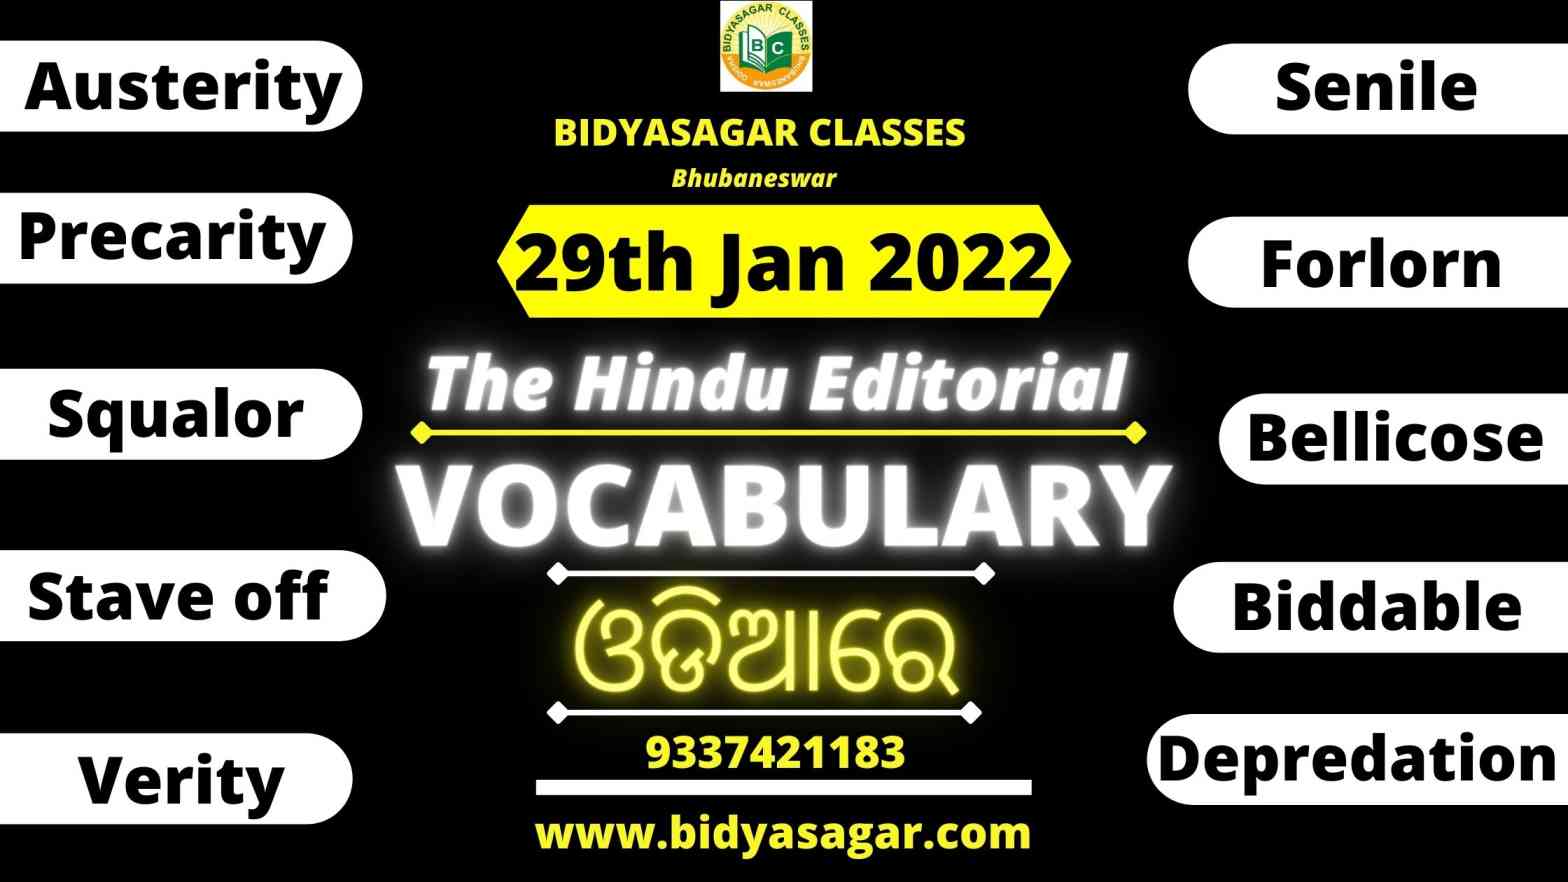 The Hindu Editorial Vocabulary of 29th January 2022